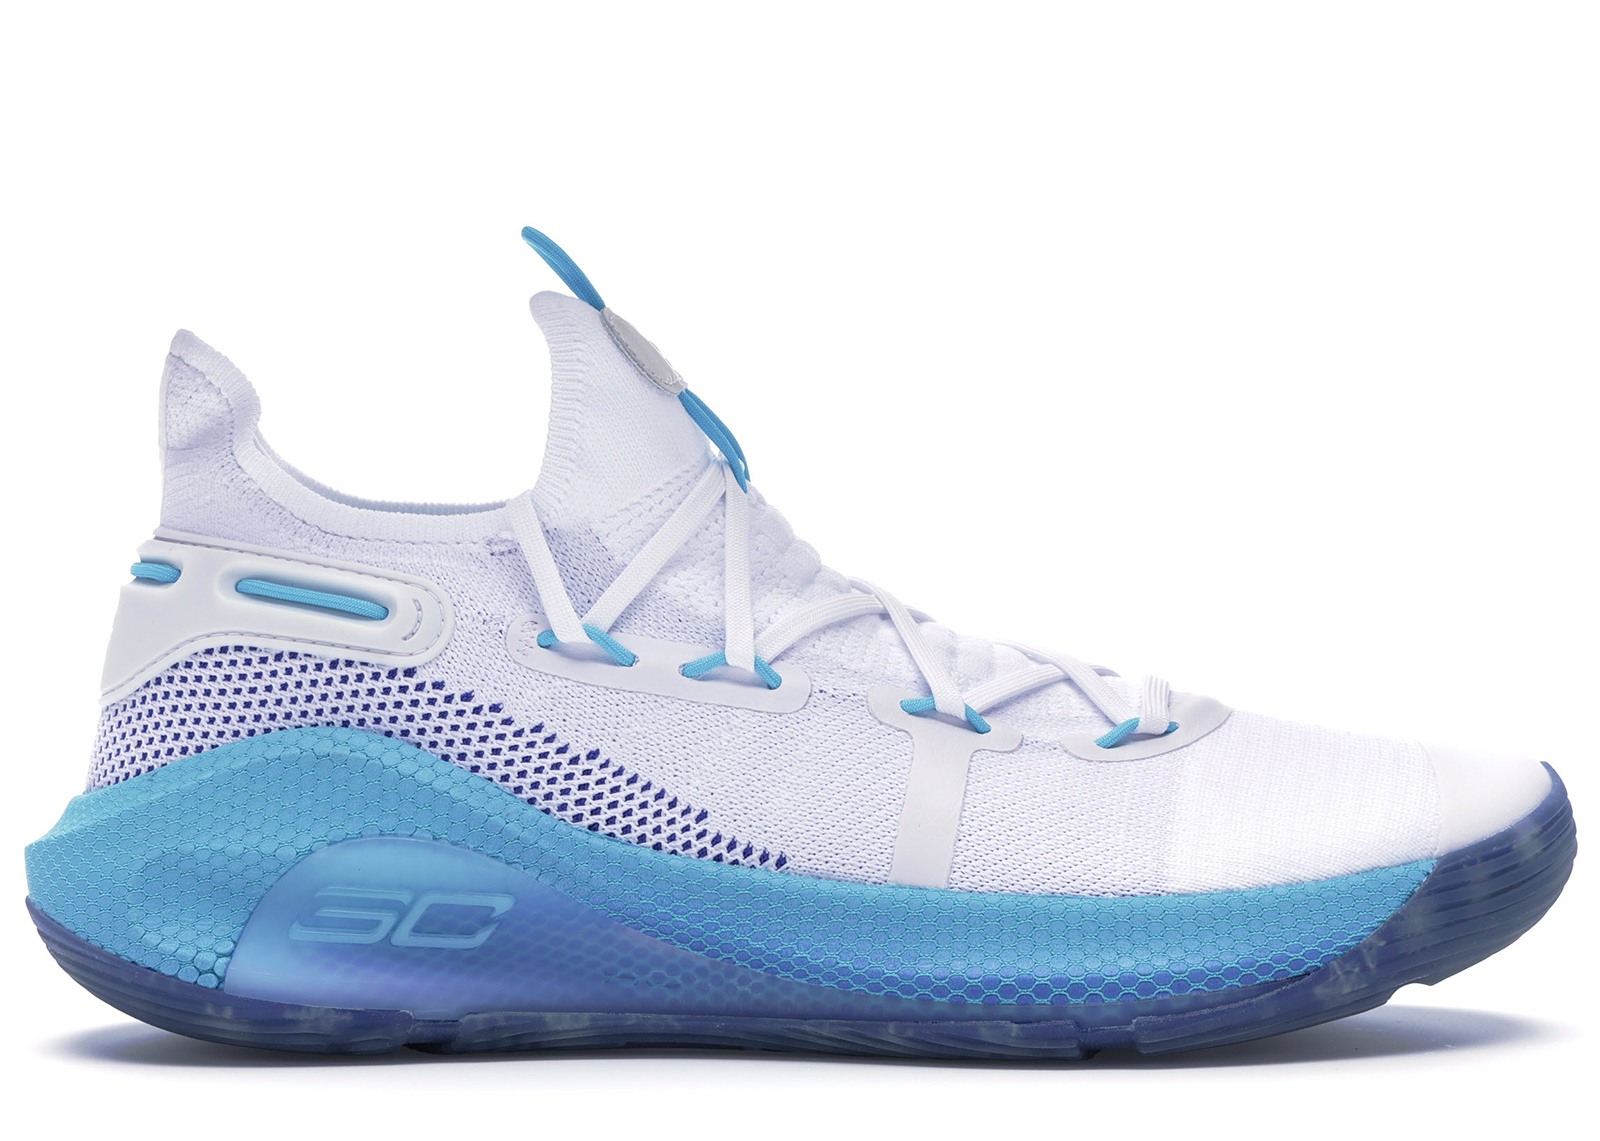 Under Armour Curry 6 Christmas in the Town メンズ - 3022386-100 - JP